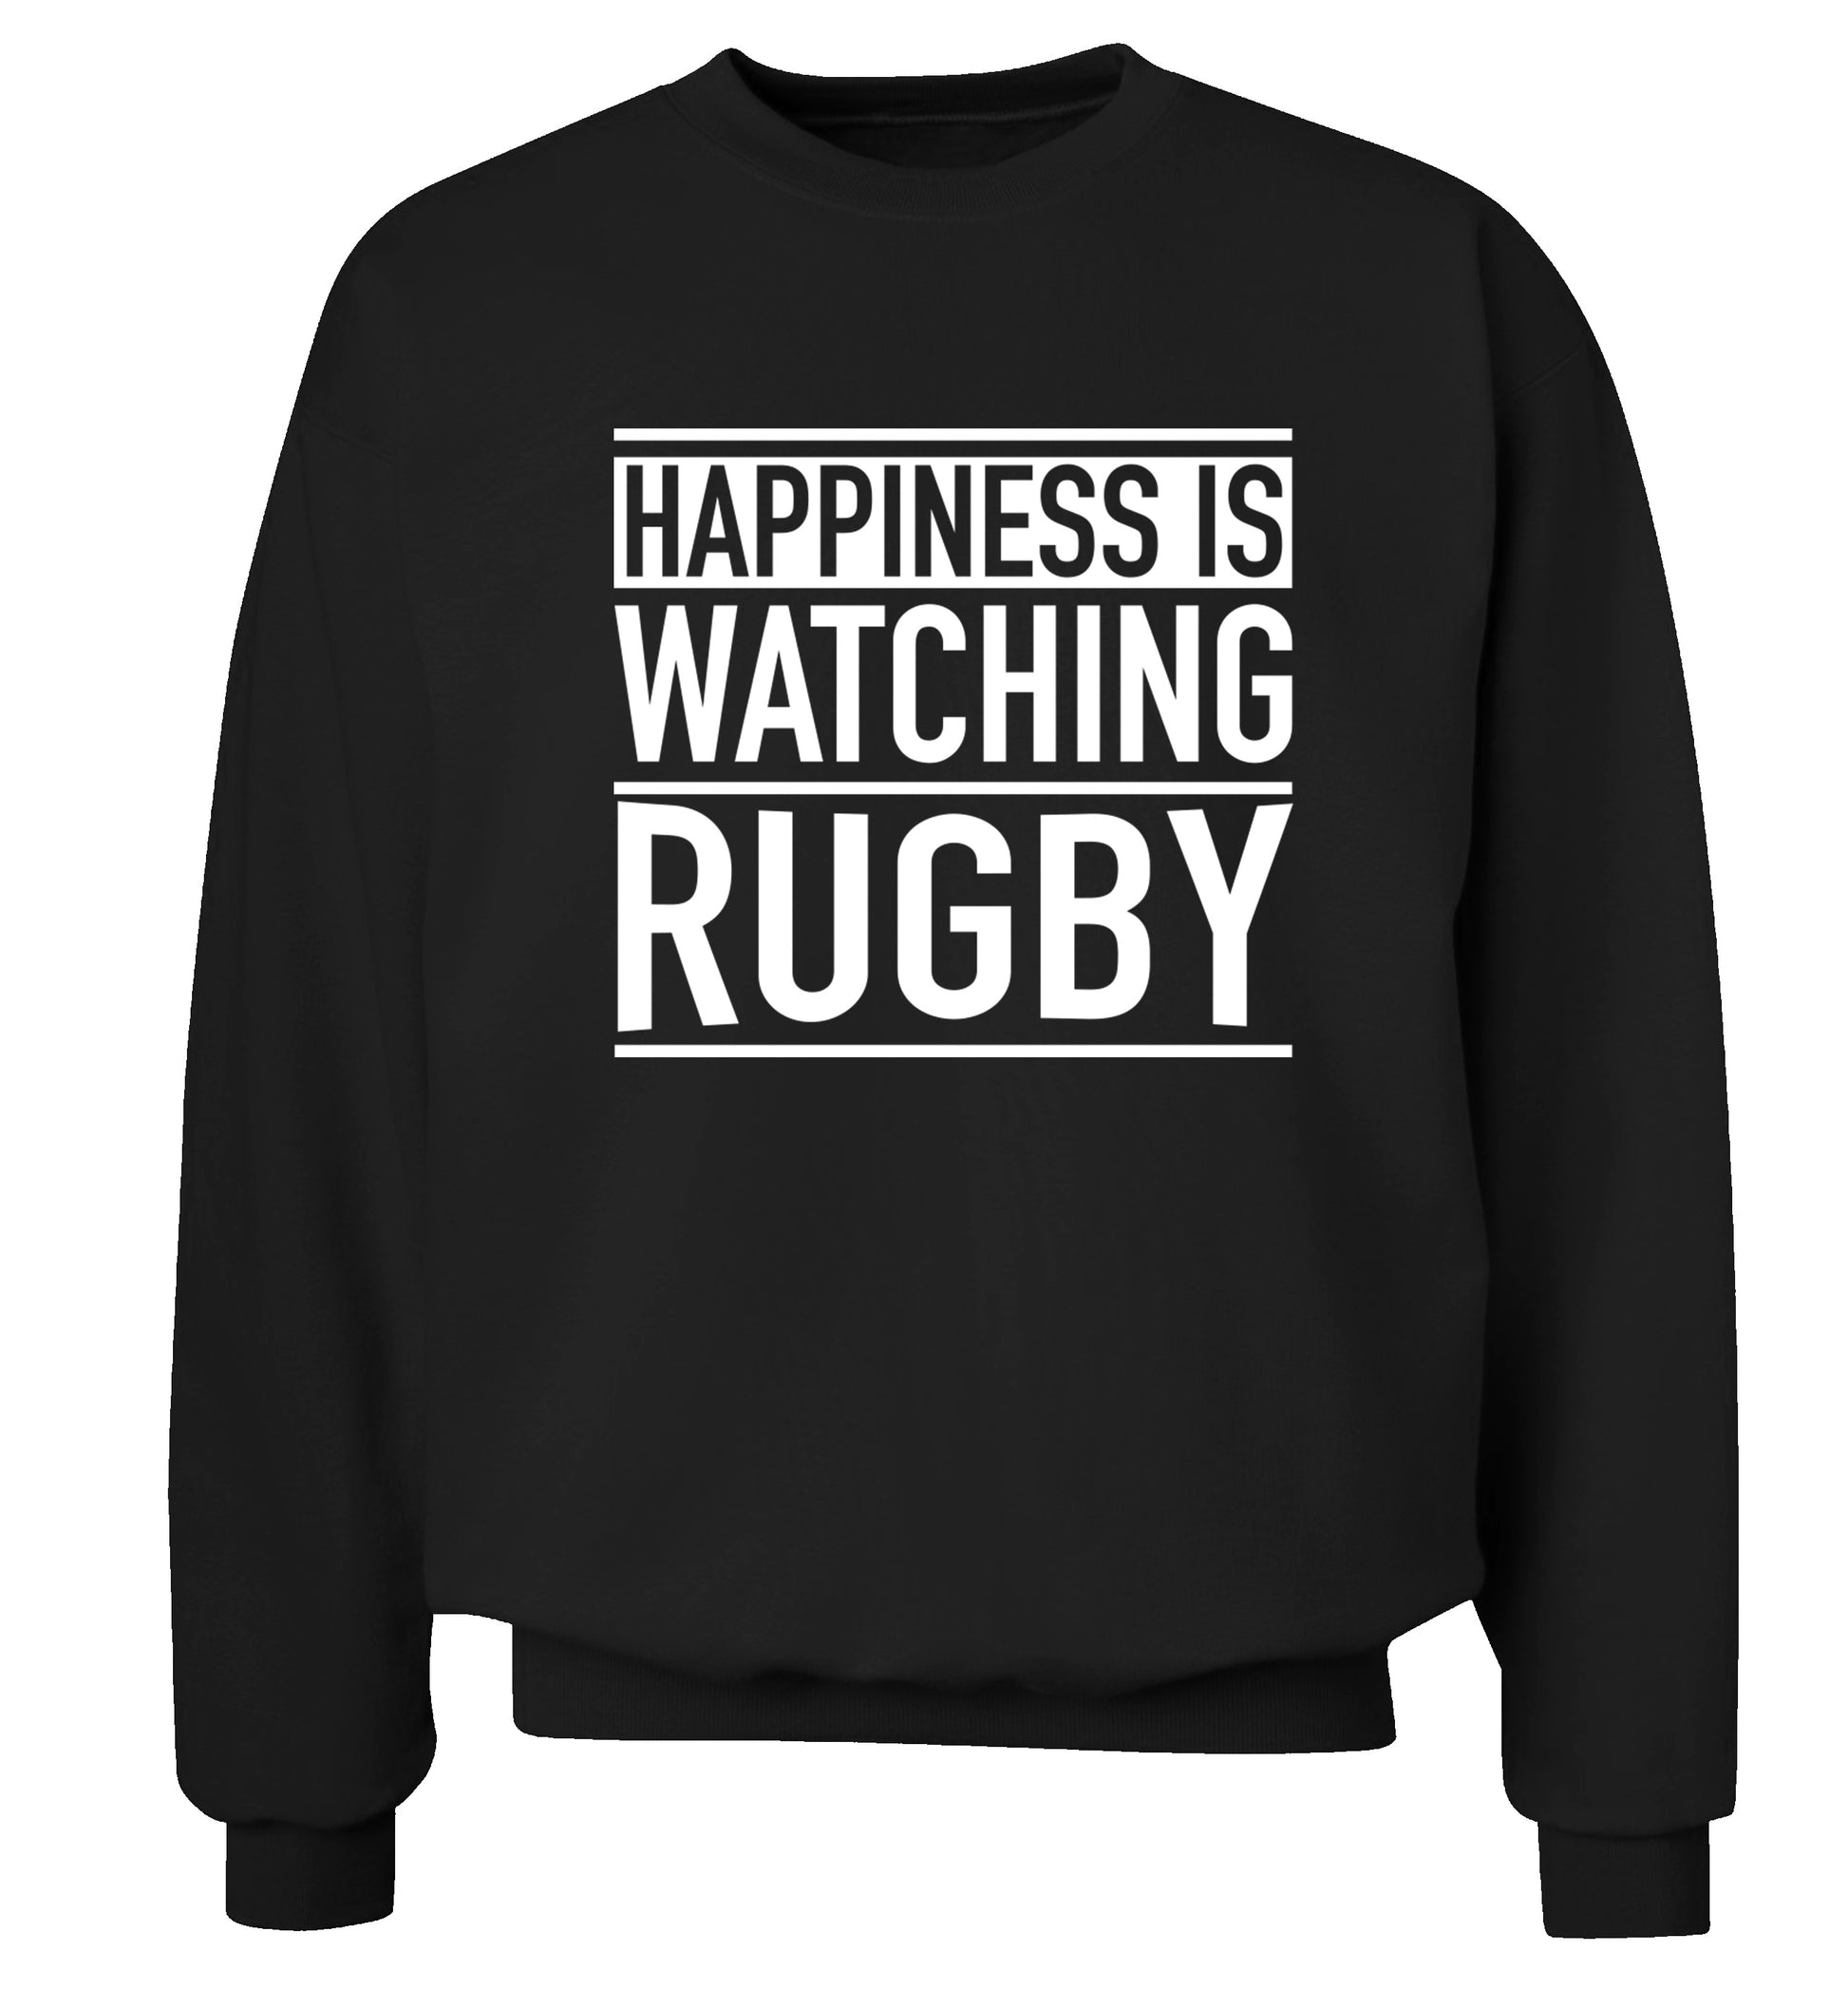 Happiness is watching rugby Adult's unisex black Sweater 2XL